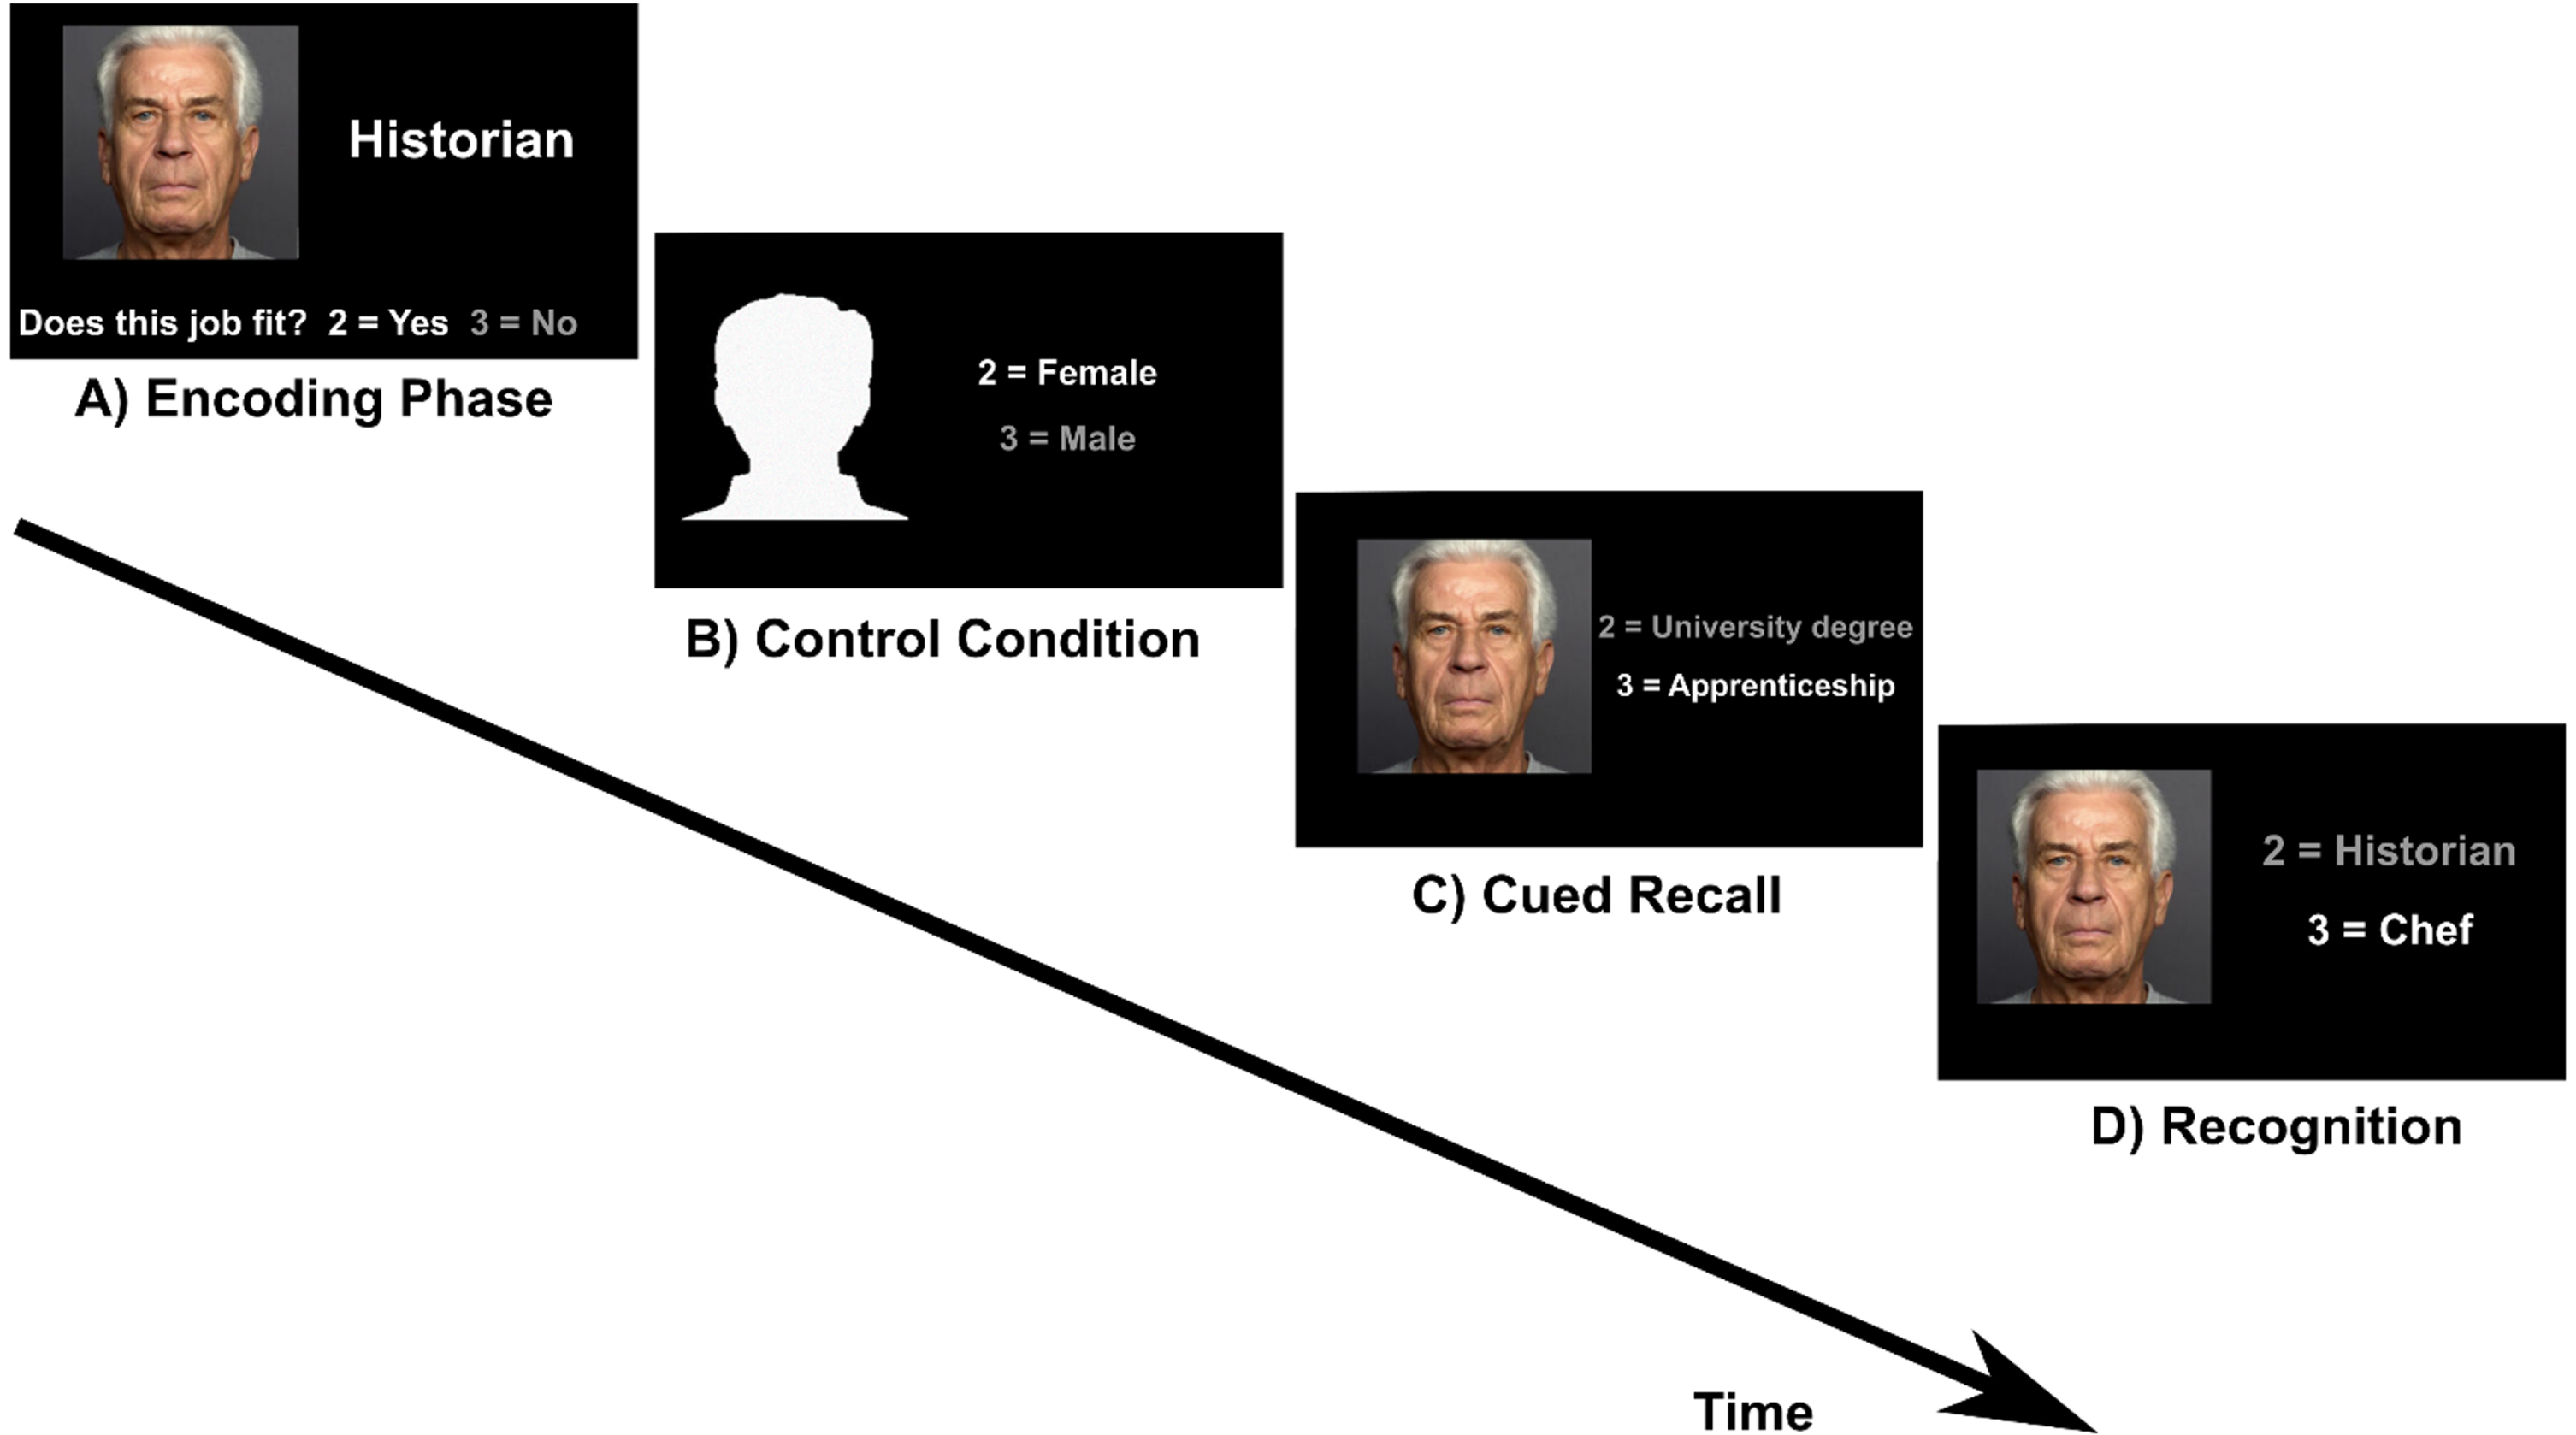 Face-occupation task. A) Encoding: participants were asked whether a face matches an occupation (subjective rating) B) Control condition: participants were asked to indicate whether a male or female silhouette is shown. C) Cued recall: a face from the encoding condition was presented as cue and participants indicated whether the occupation of the presented person requires a university degree or an apprenticeship. D) Recognition: participants had to choose the correct job between two different options.